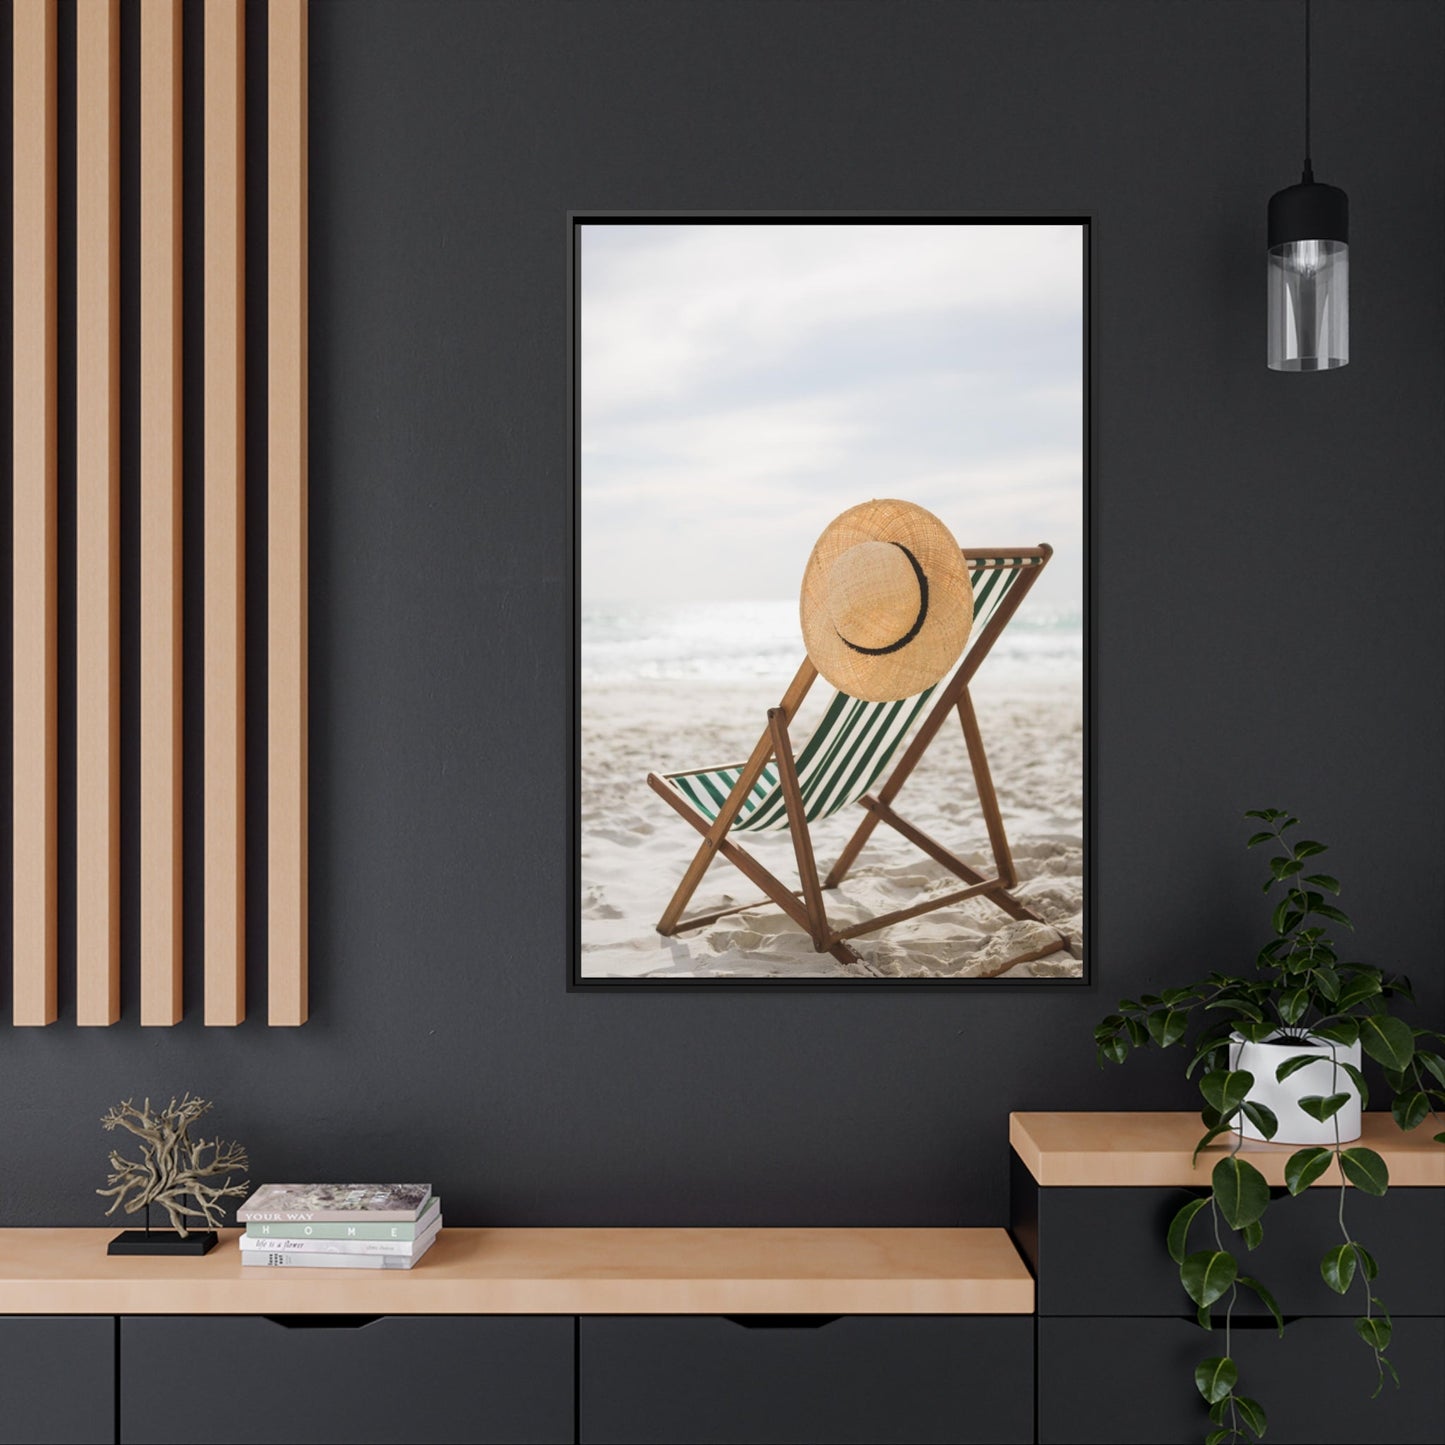 Unwind and Destress: Framed Poster for a Relaxing Retreat